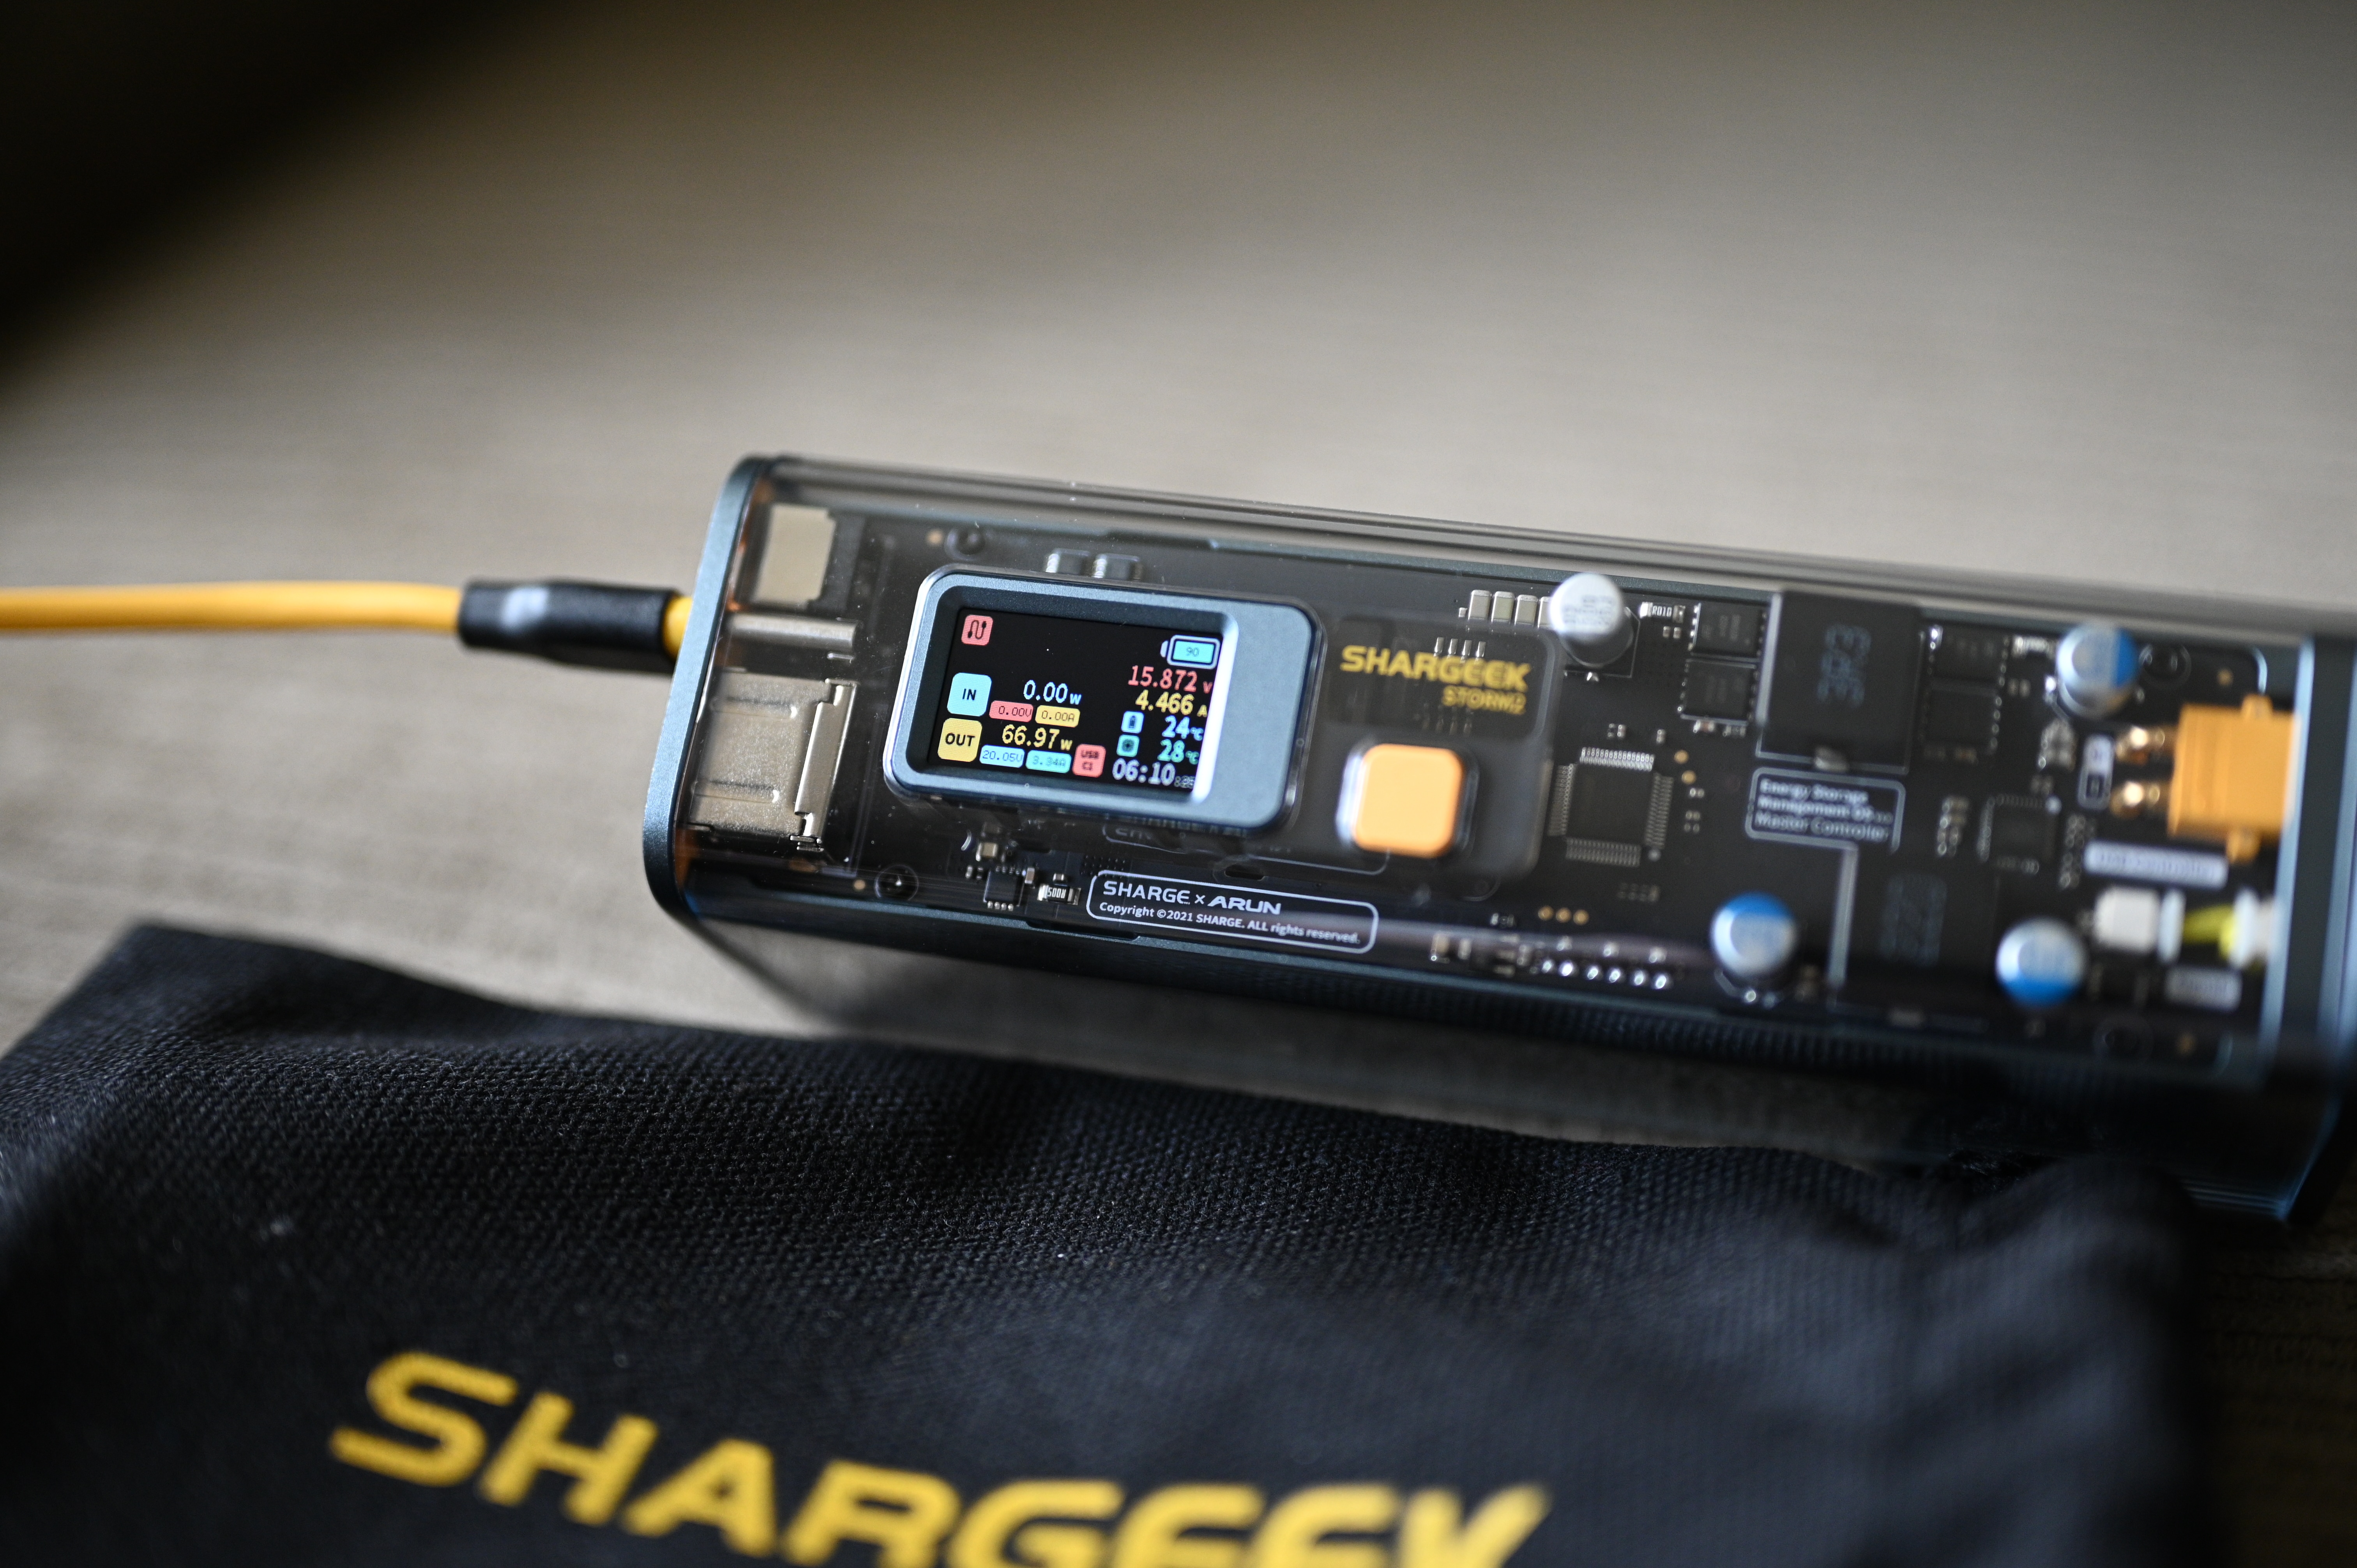 The Shargeek Storm 2 battery pack boasts high-capacity power in a slick package supporting up to 100W PD